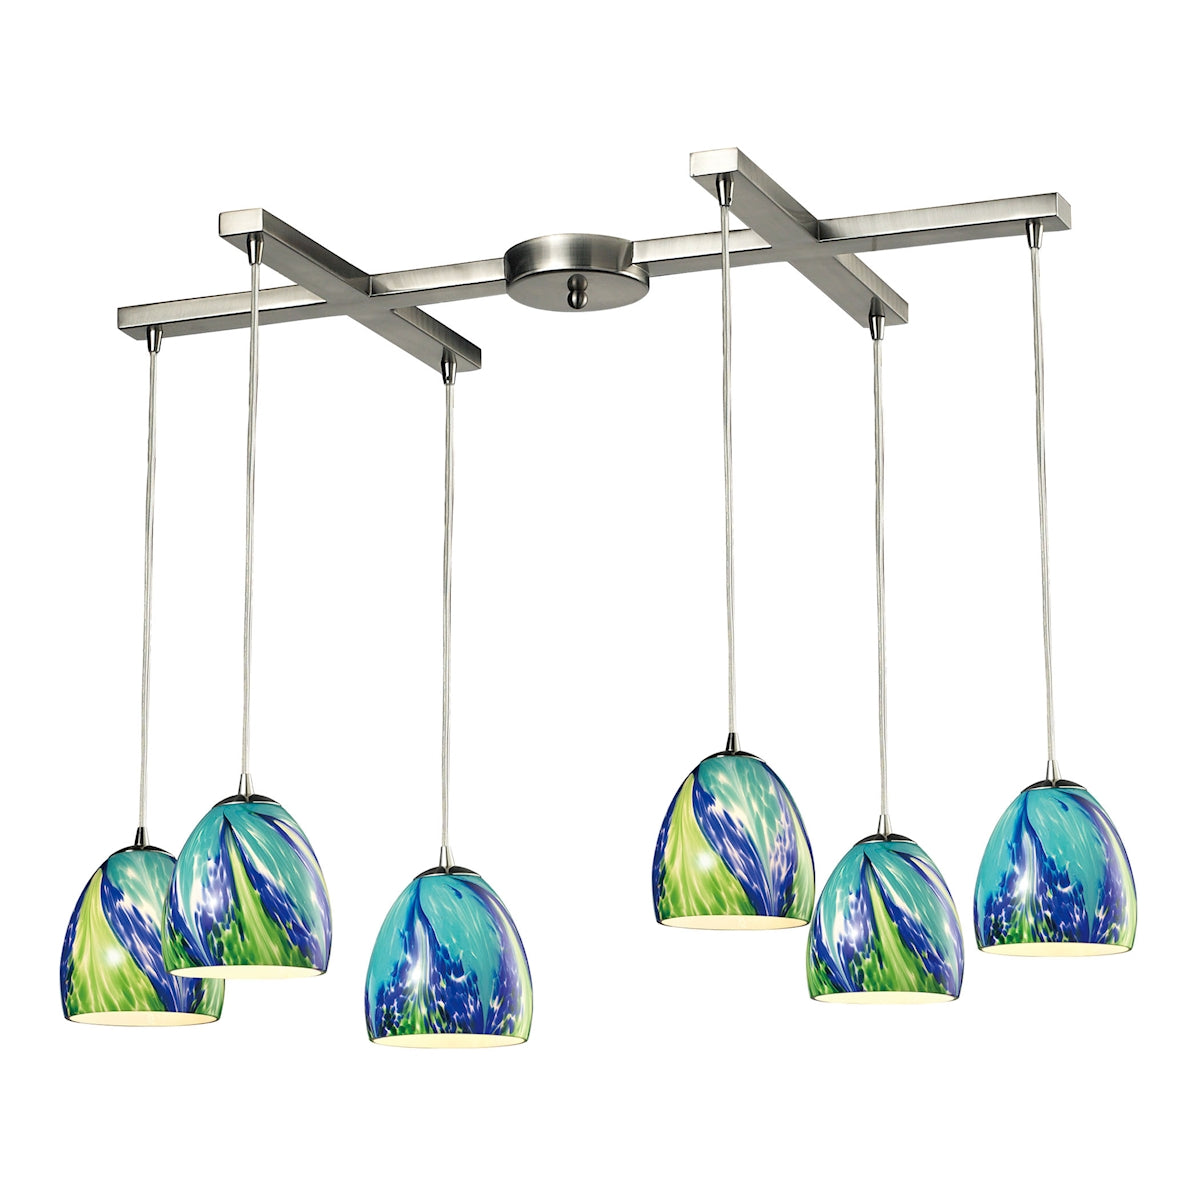 ELK Lighting 31445/6TB Colorwave 6-Light H-Bar Pendant Fixture in Satin Nickel with Blue and Green Glass